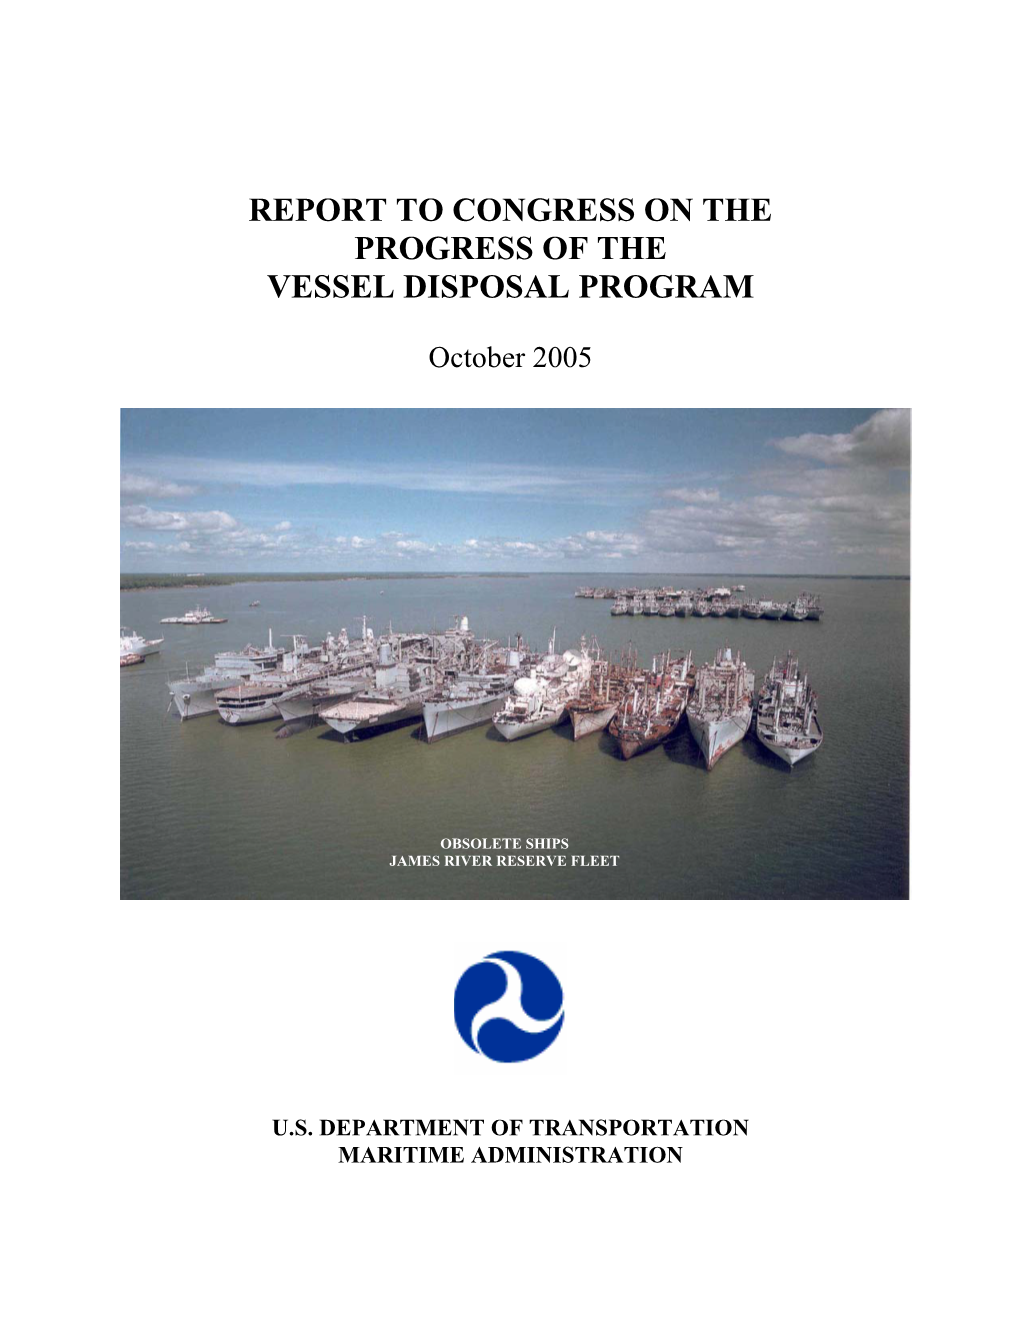 Report to Congress on the Progress of the Vessel Disposal Program